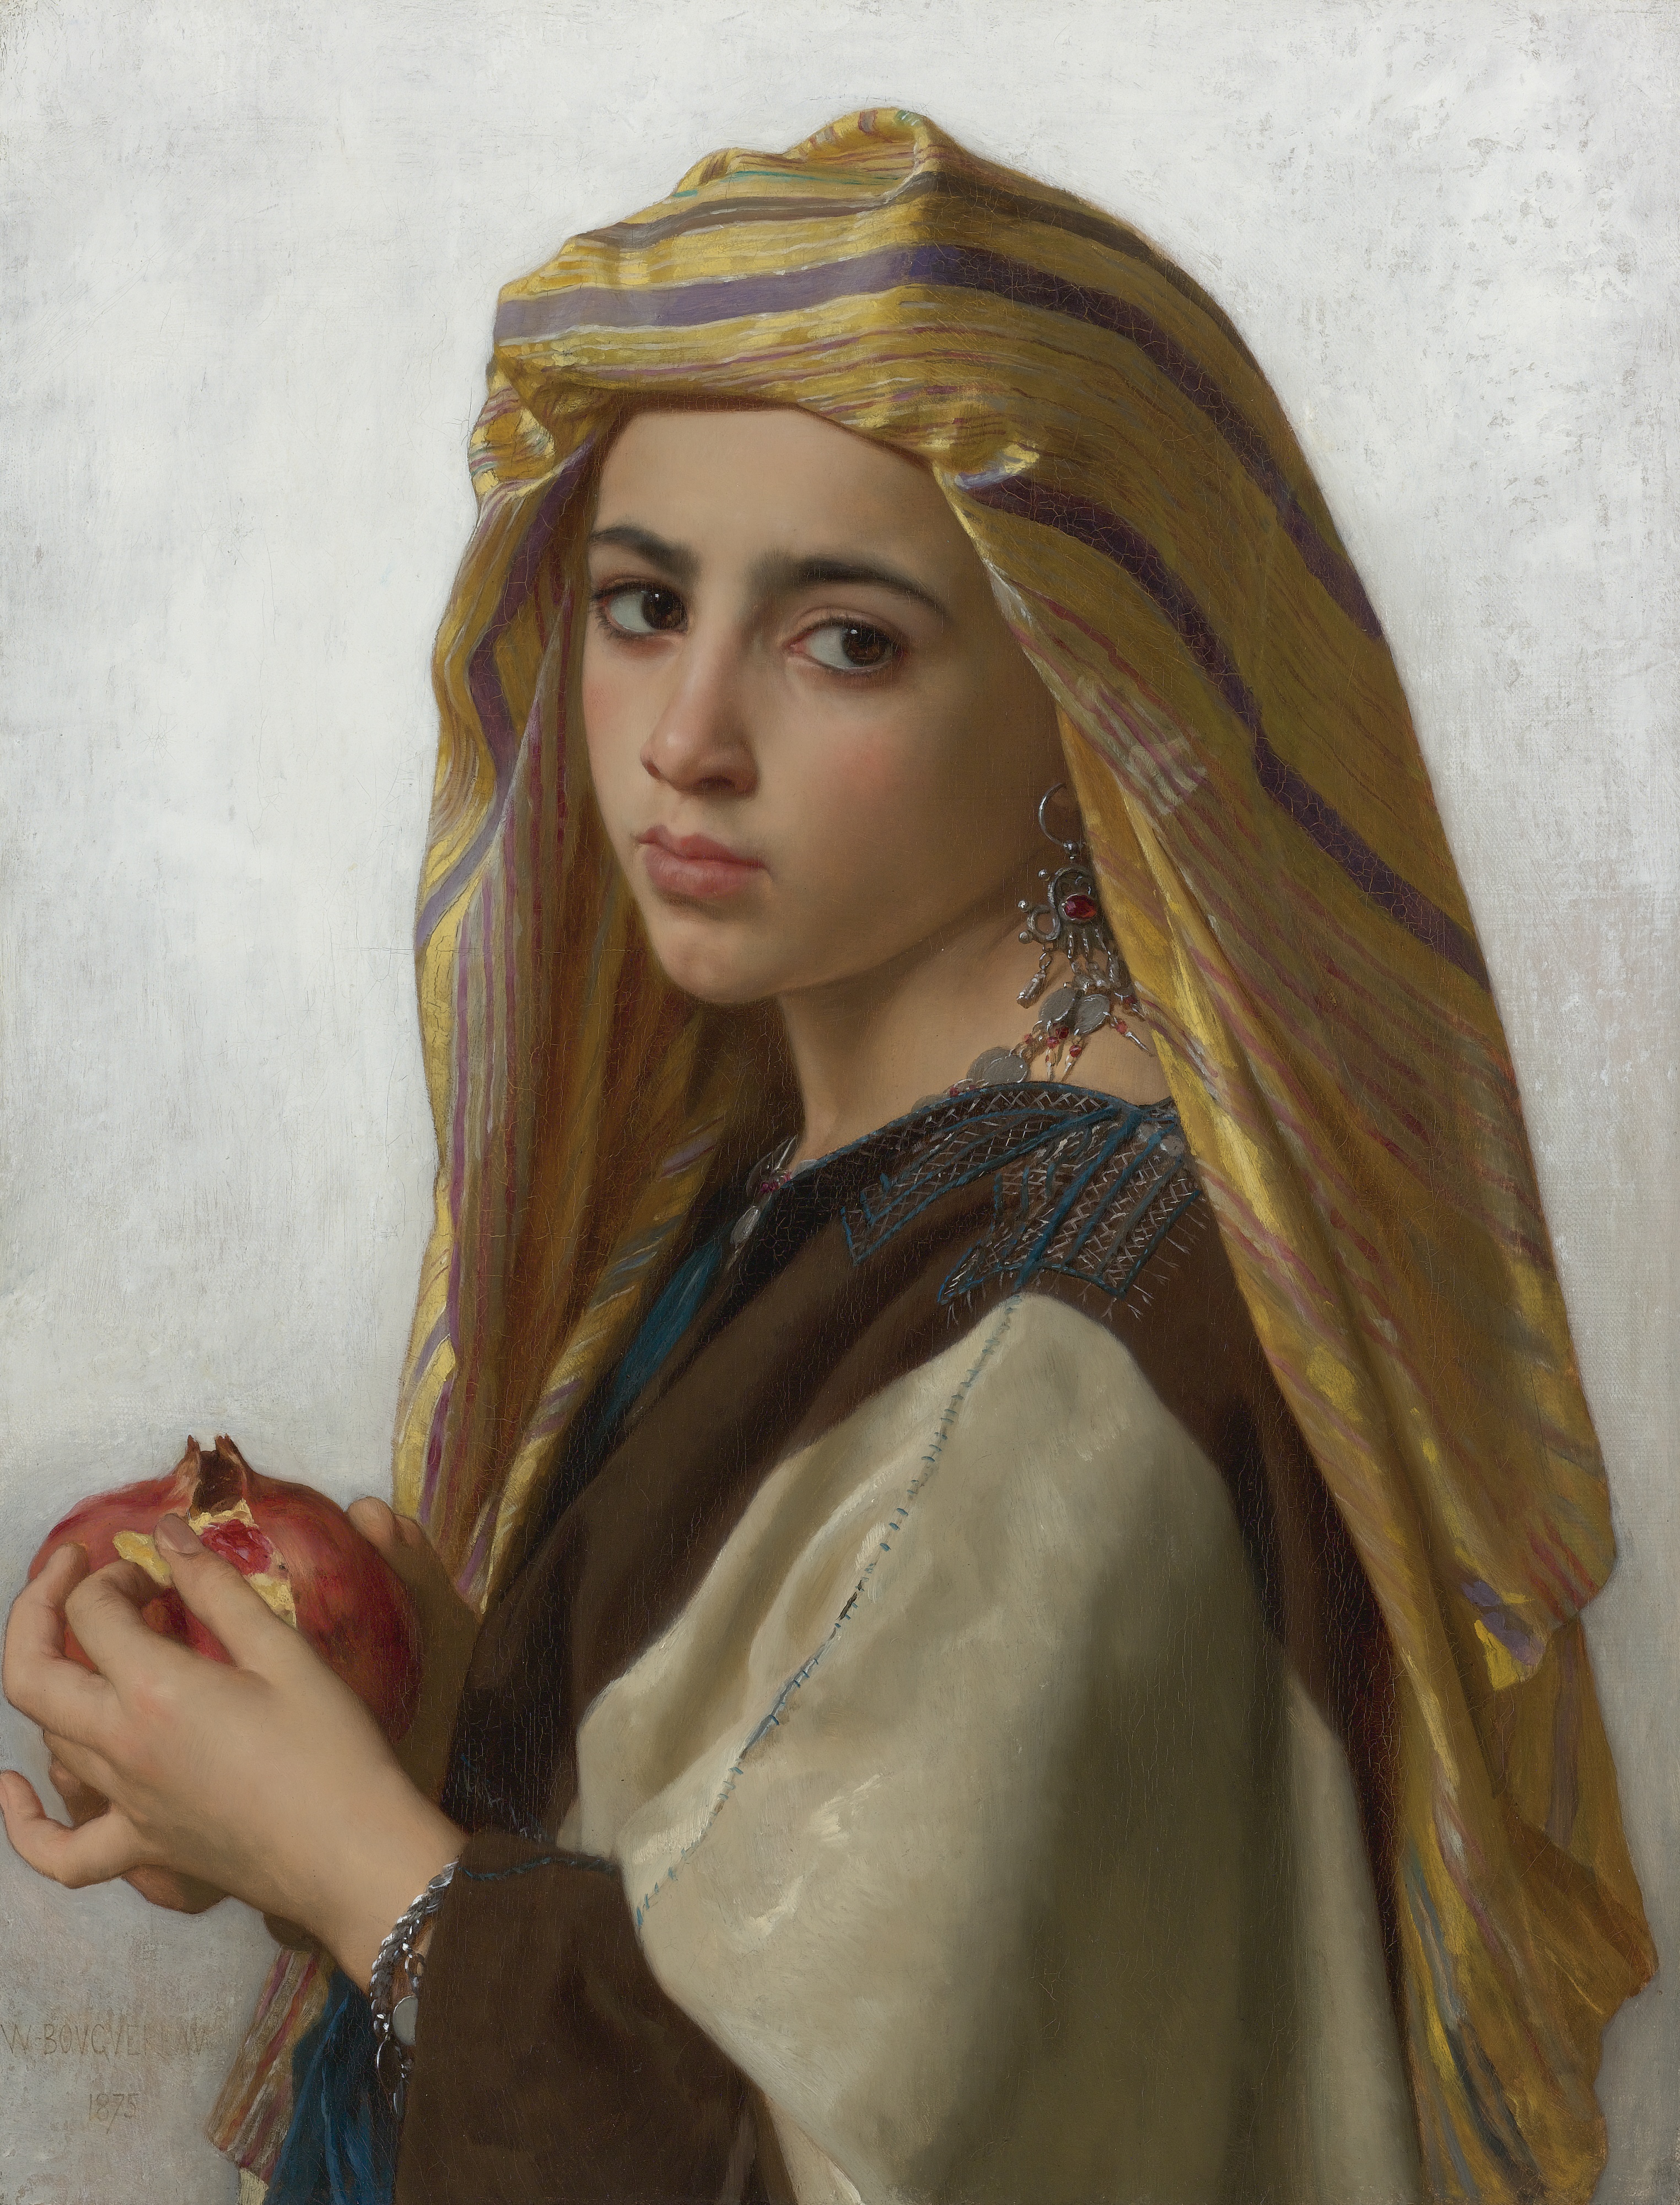 http://upload.wikimedia.org/wikipedia/commons/1/1d/Girl_with_a_pomegranate,_by_William_Bouguereau.jpg